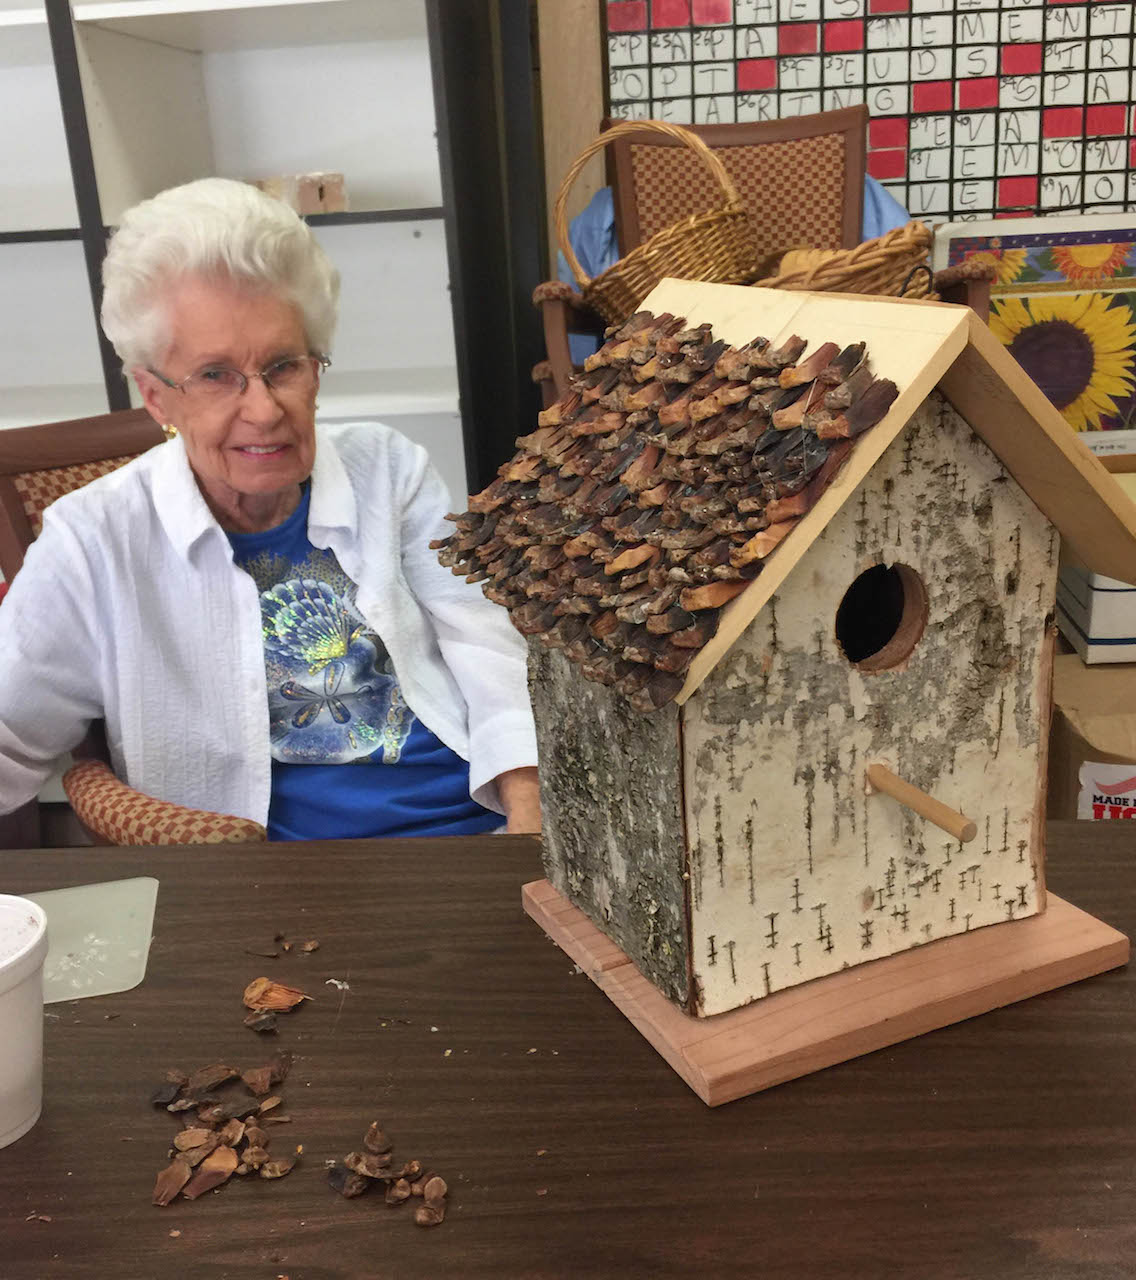 Small Woodworking Projects at Local Senior Center - The 